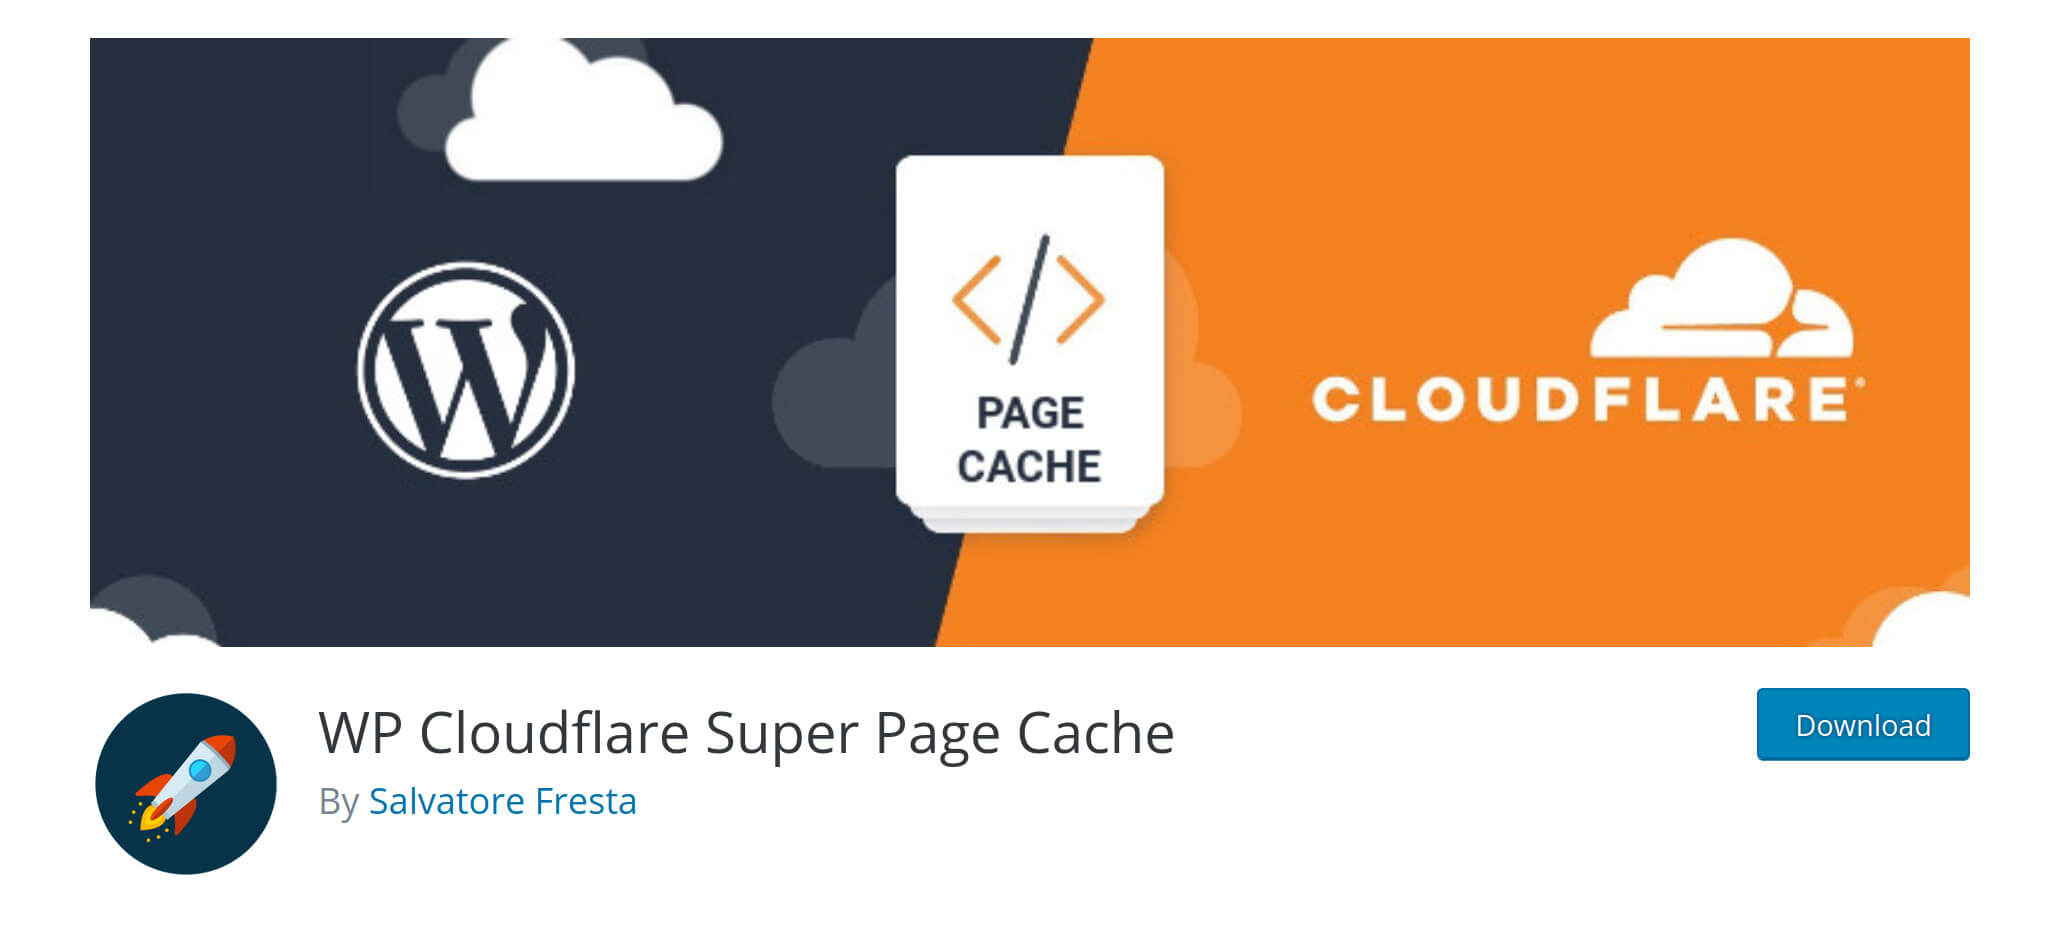 wp cloudflare super page cache